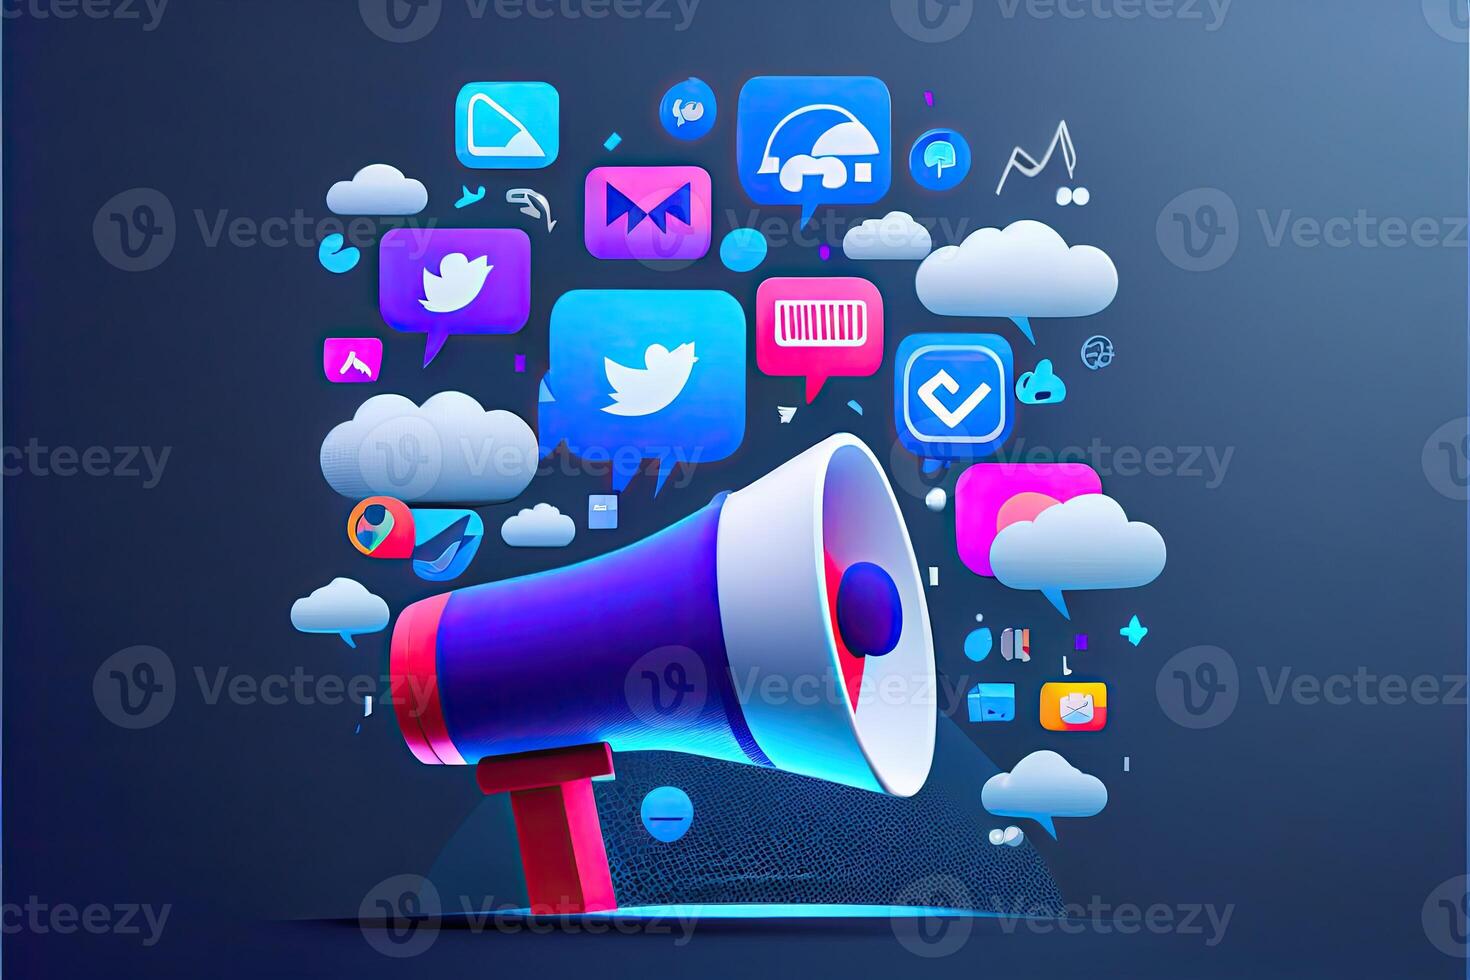 web site article image, material design, dark blue gradient background, megaphone in the left side of image, social networks icon photo